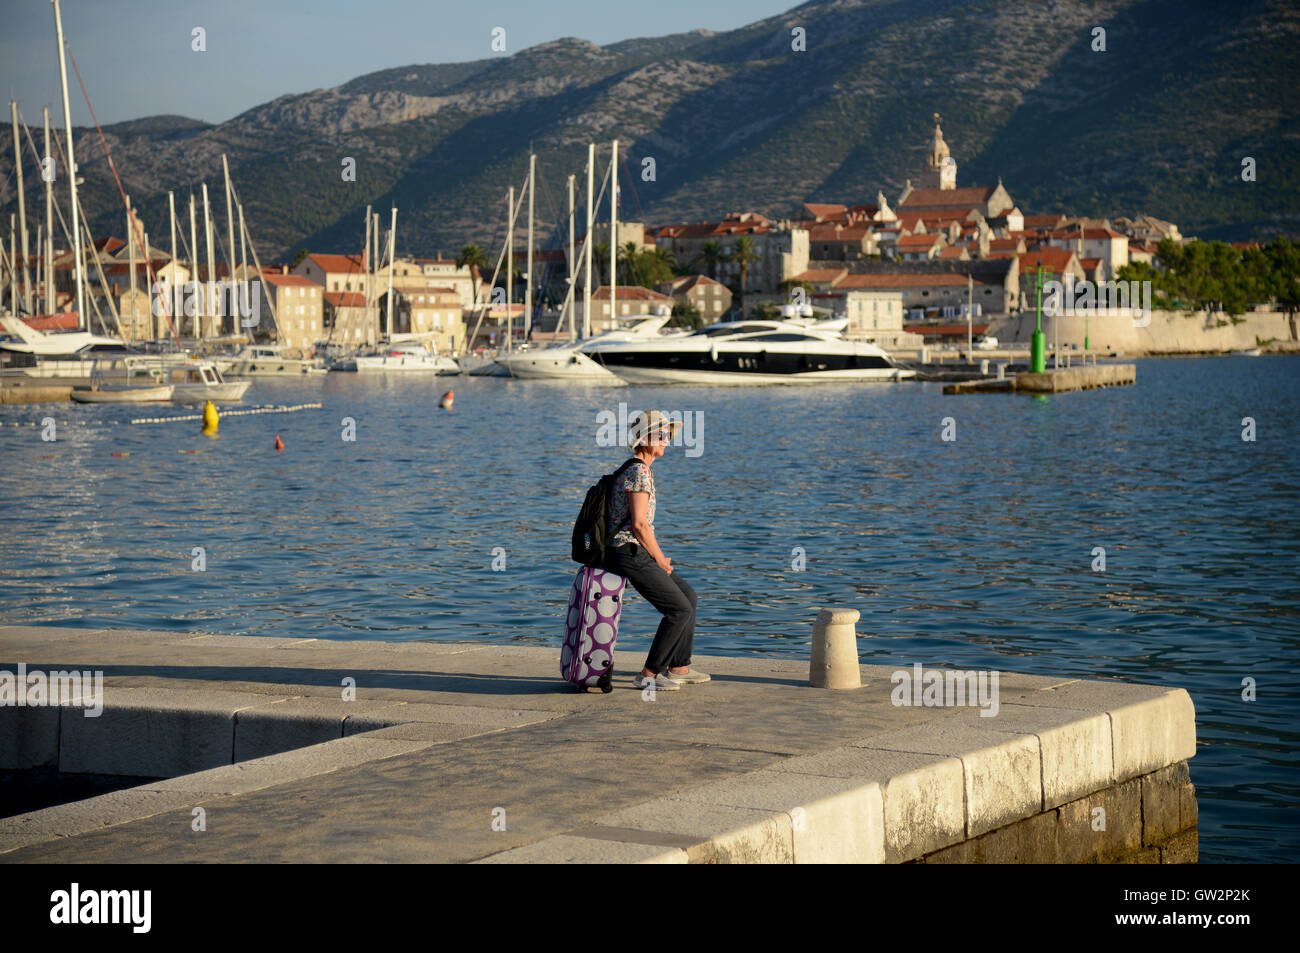 A holidaymaker waits on the quayside for a ferry at Korcula harbour, Croatia. Stock Photo